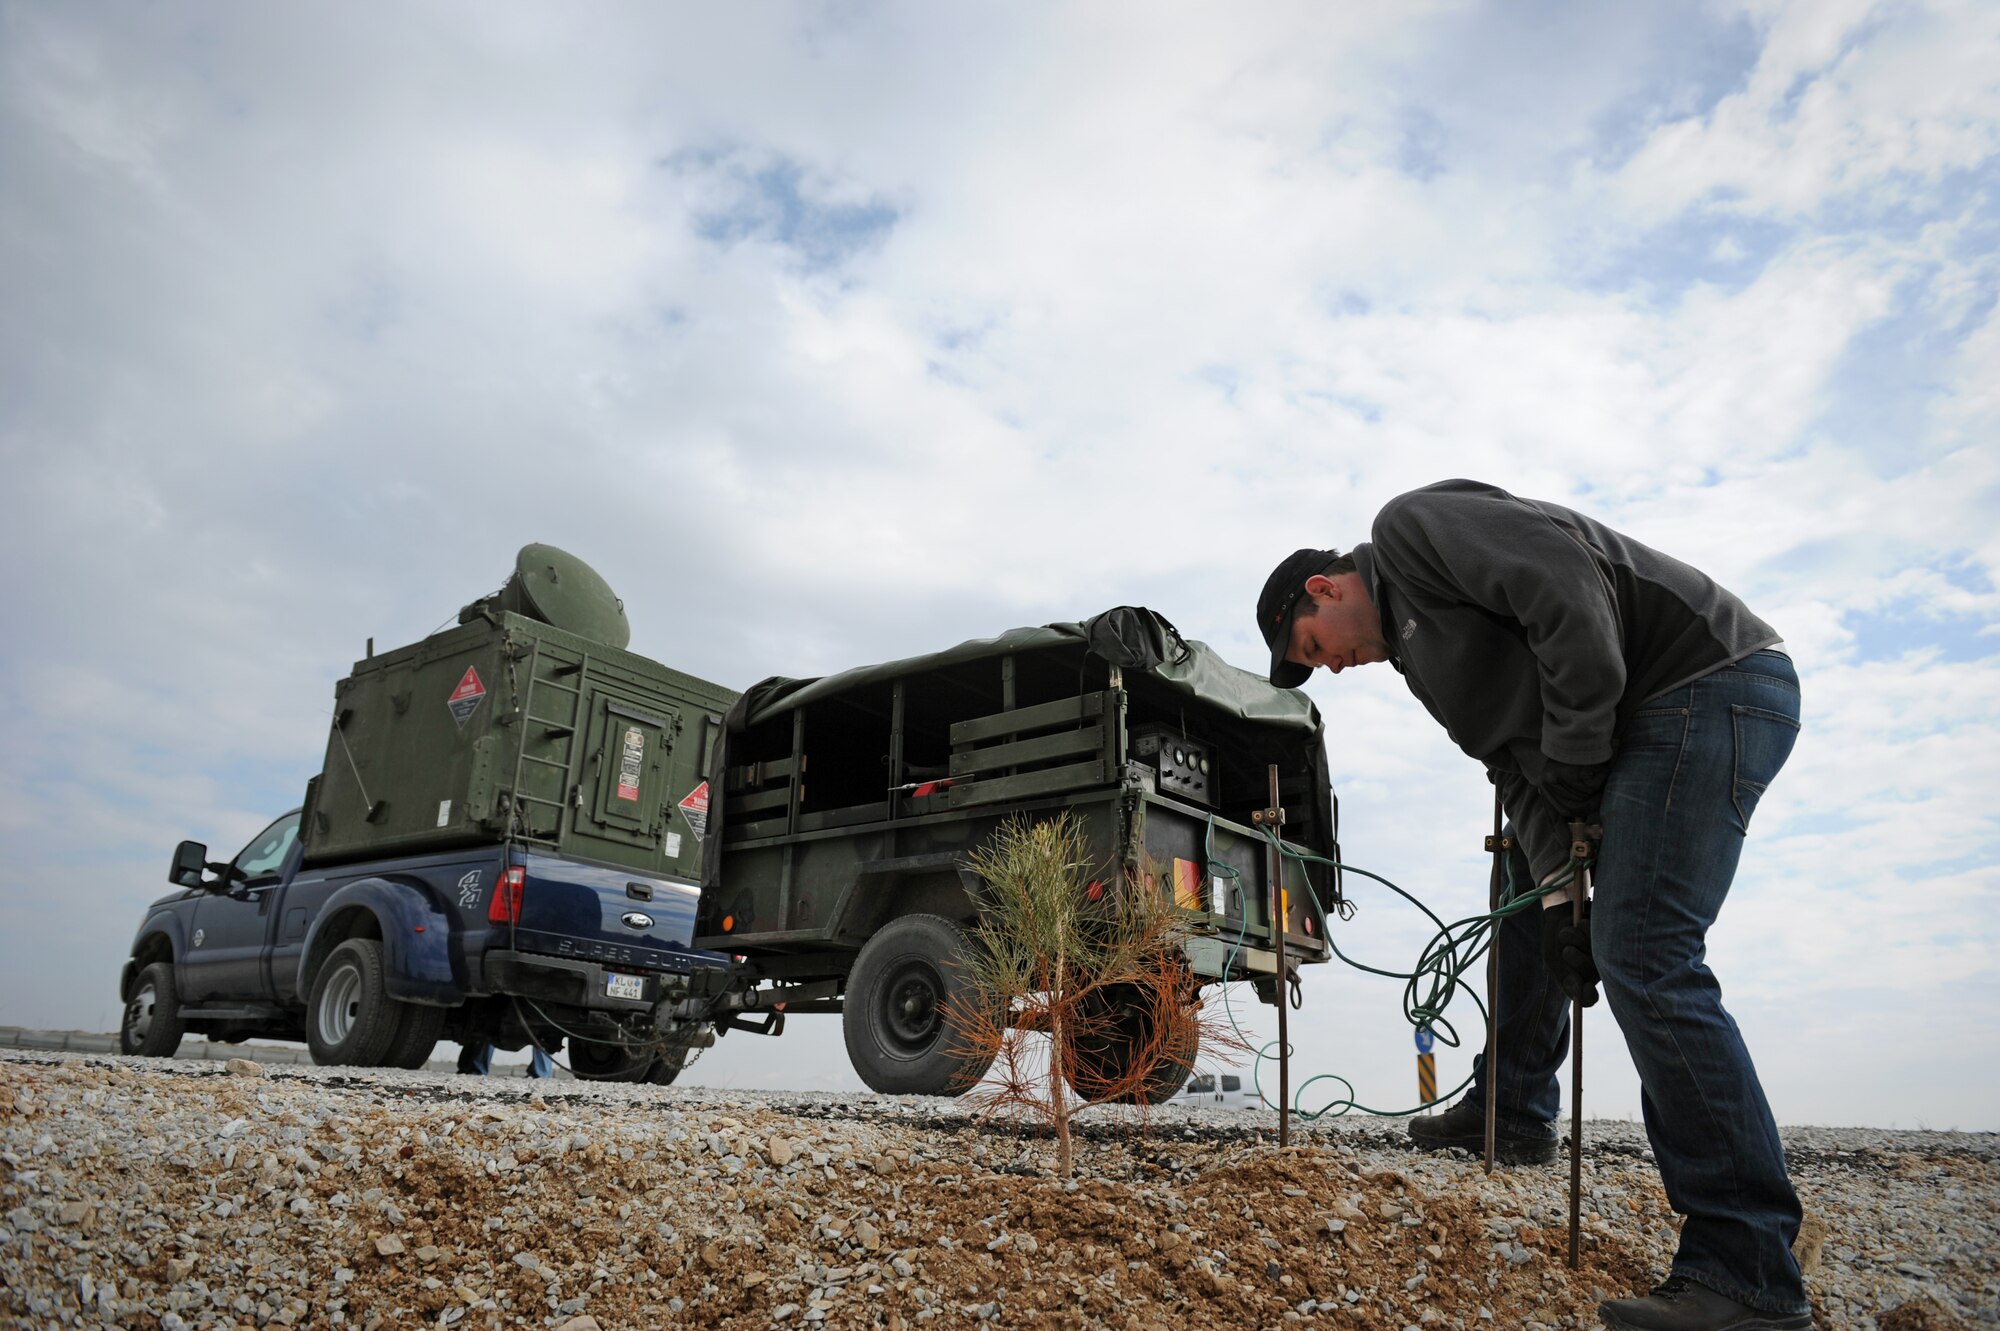 Carl Gessman, a Polygone radar operator, attaches grounding rods for a generator used to power a tactical radar threat generator during Anatolian Falcon 2012 in Konya, Turkey, March 8, 2012. The radar provided a simulated enemy ground threat capability to the pilots participating in the exercise. (U.S. Air Force photo/Staff Sgt. Benjamin Wilson)